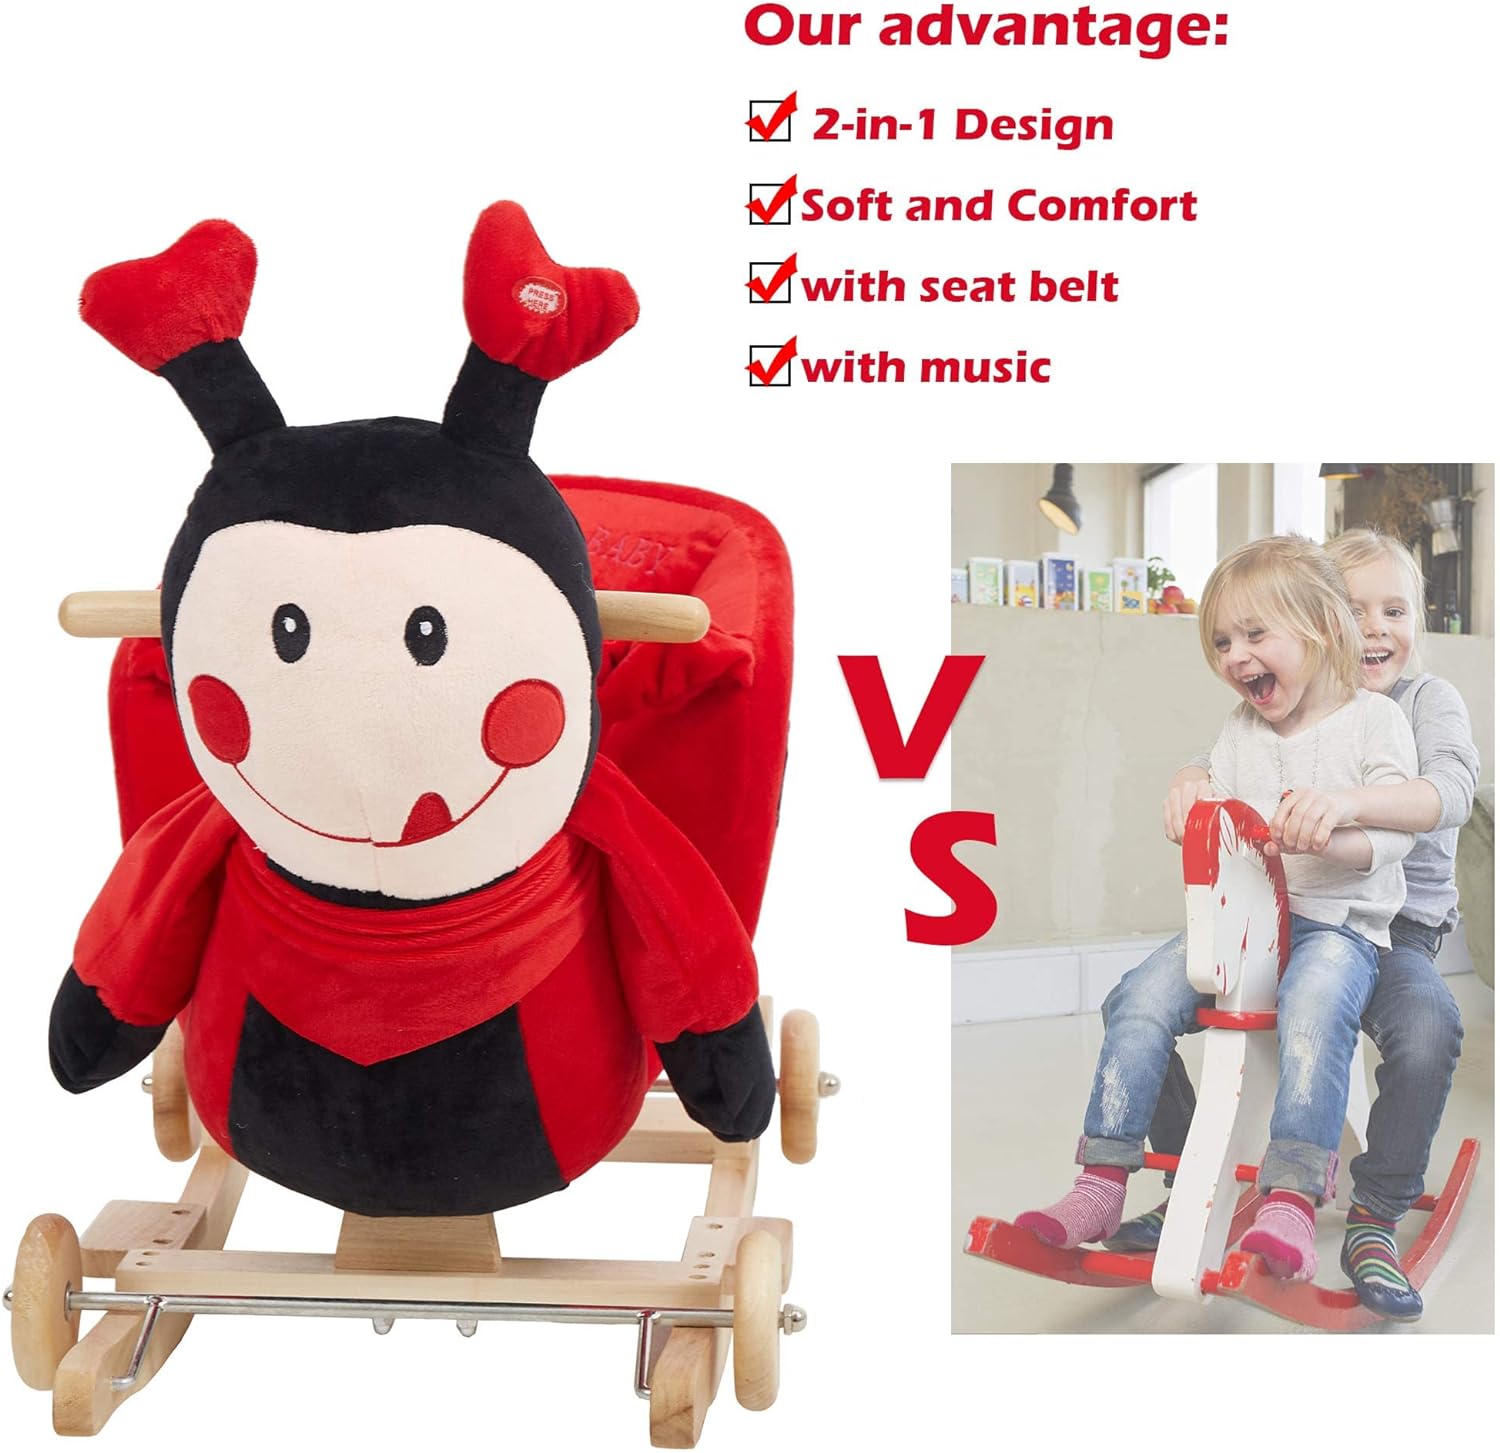 2-in-1 Ride-on Wooden Plush Rocking Horse Chair with Music for Baby Kids Toddlers, Red Ladybug